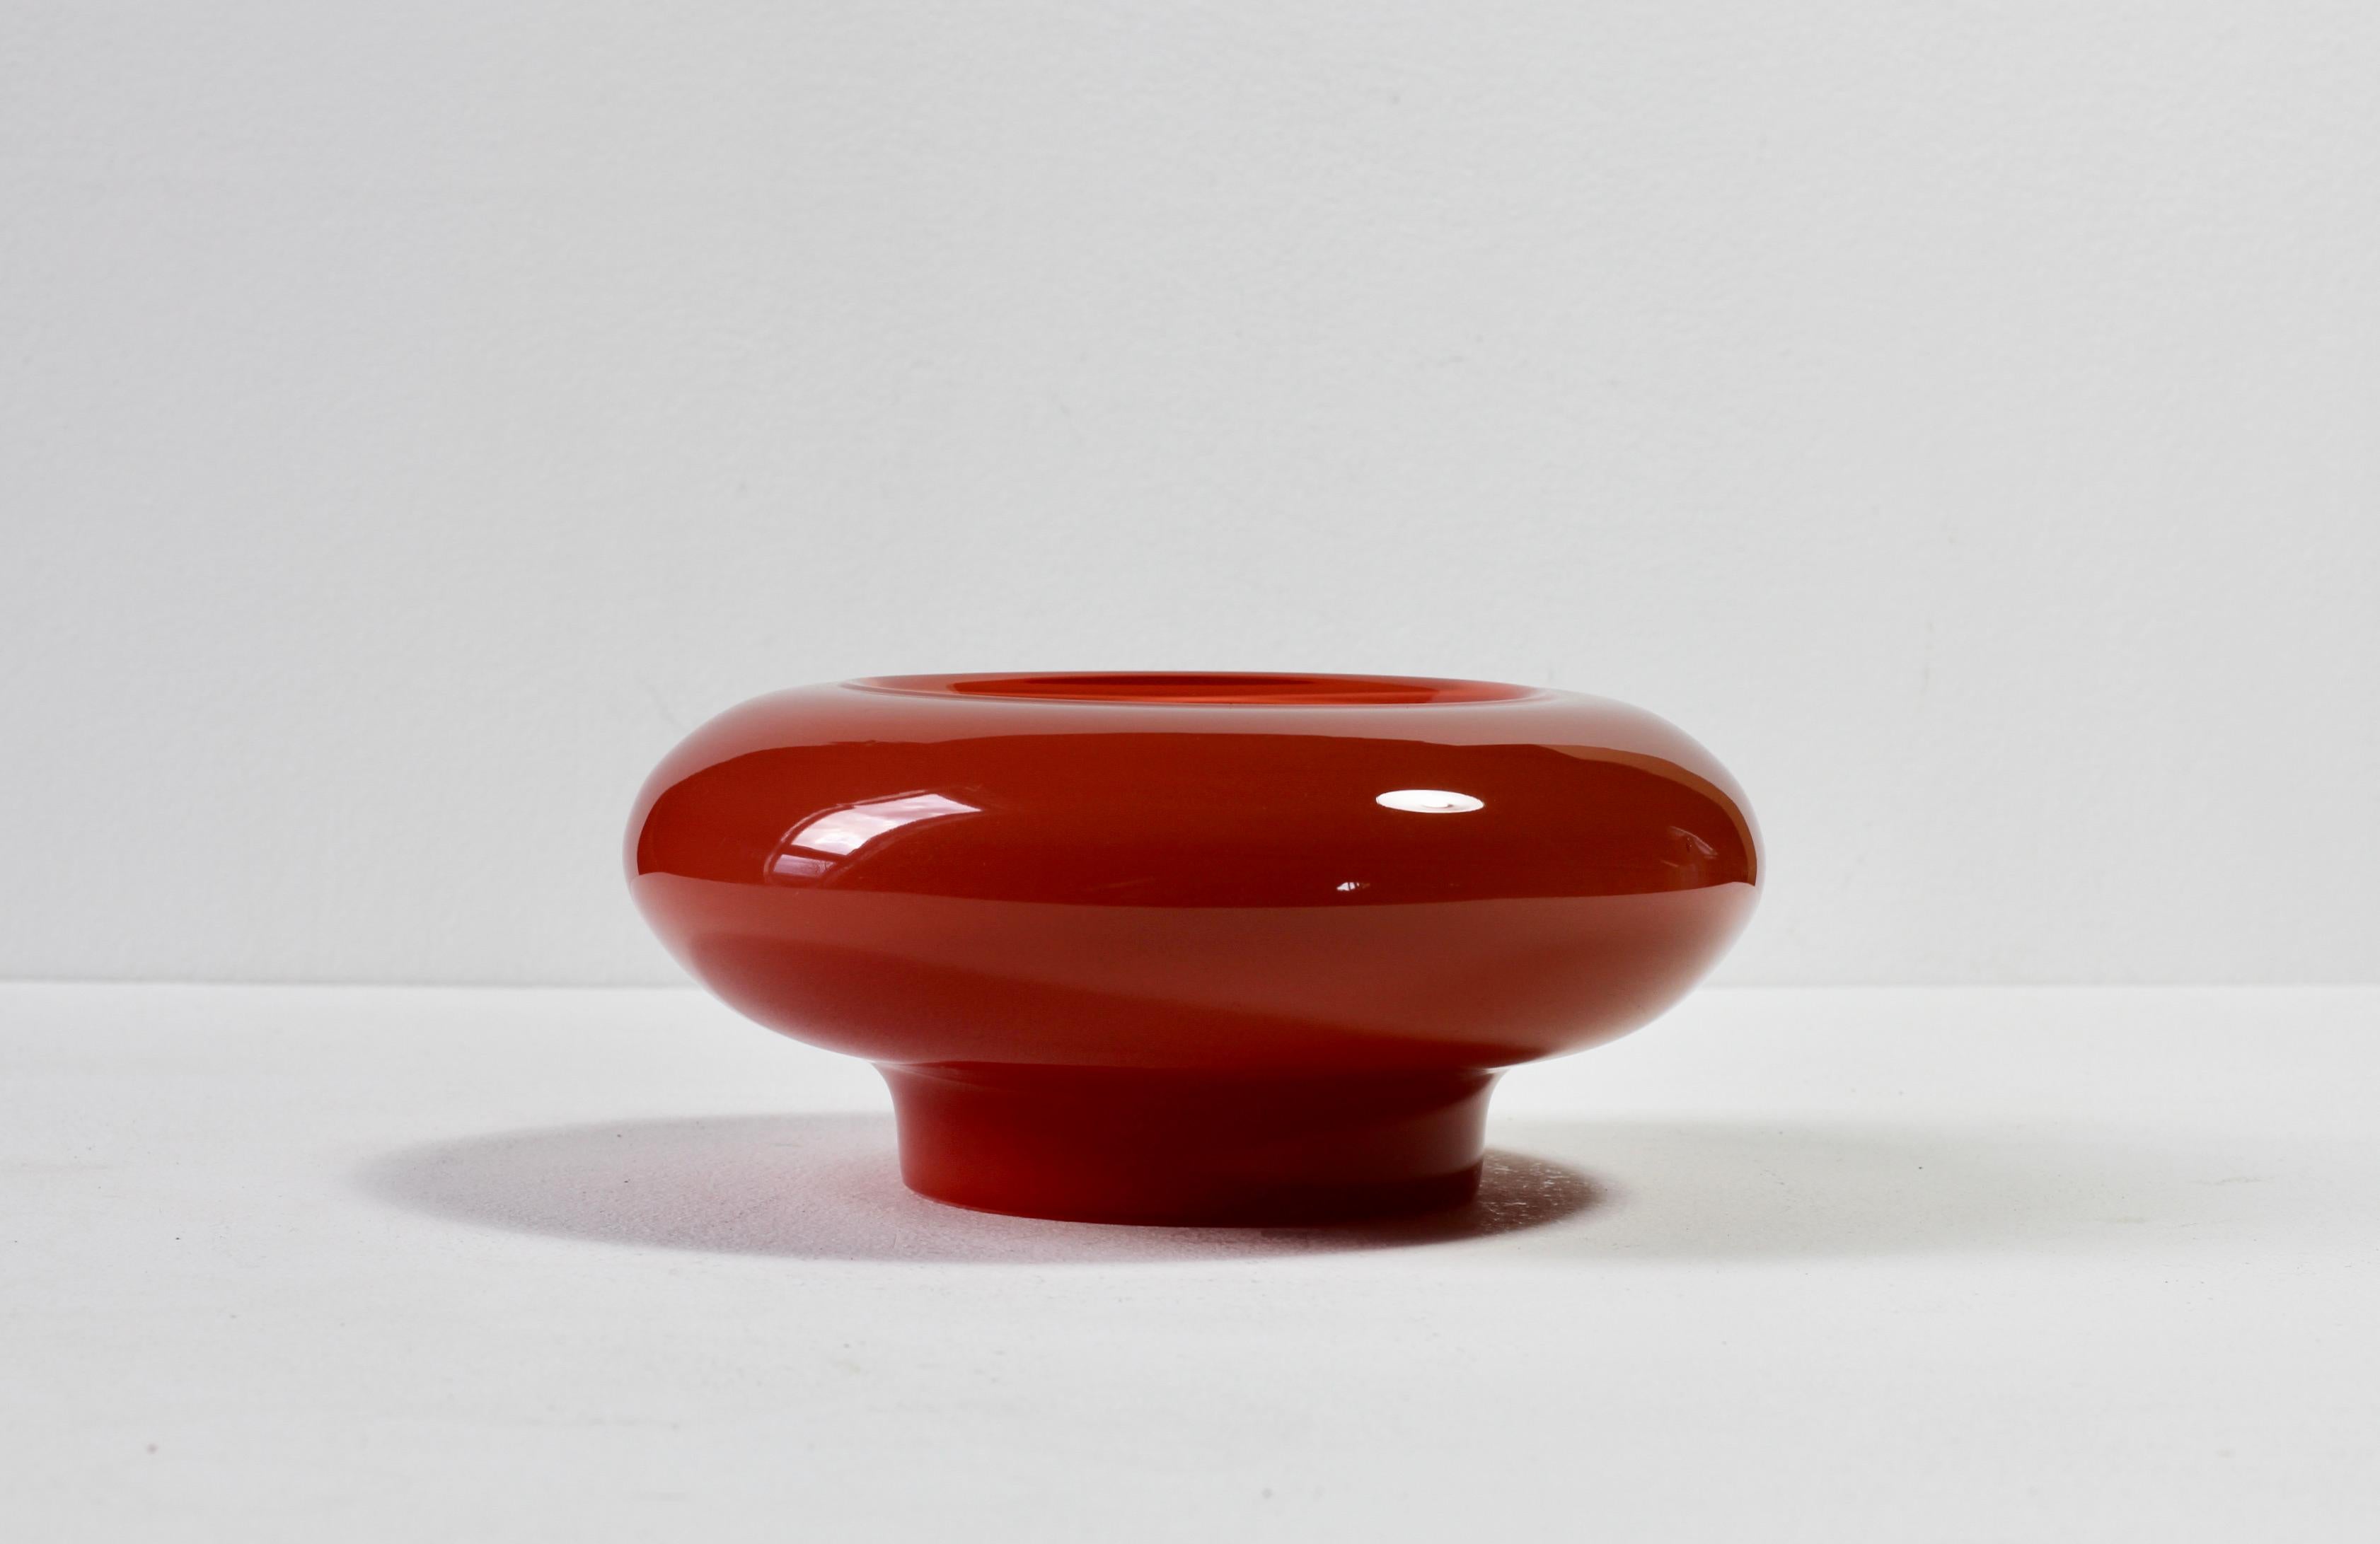 Wonderful vintage Mid-Century Modern glass bowl or vase in dark deep red attributed to Ermanno Nason for Cenedese of Murano, Italy. 

This can be used as a bowl, dish, vide-poche, ashtray or as a vase when turned upside down - perfect for displaying